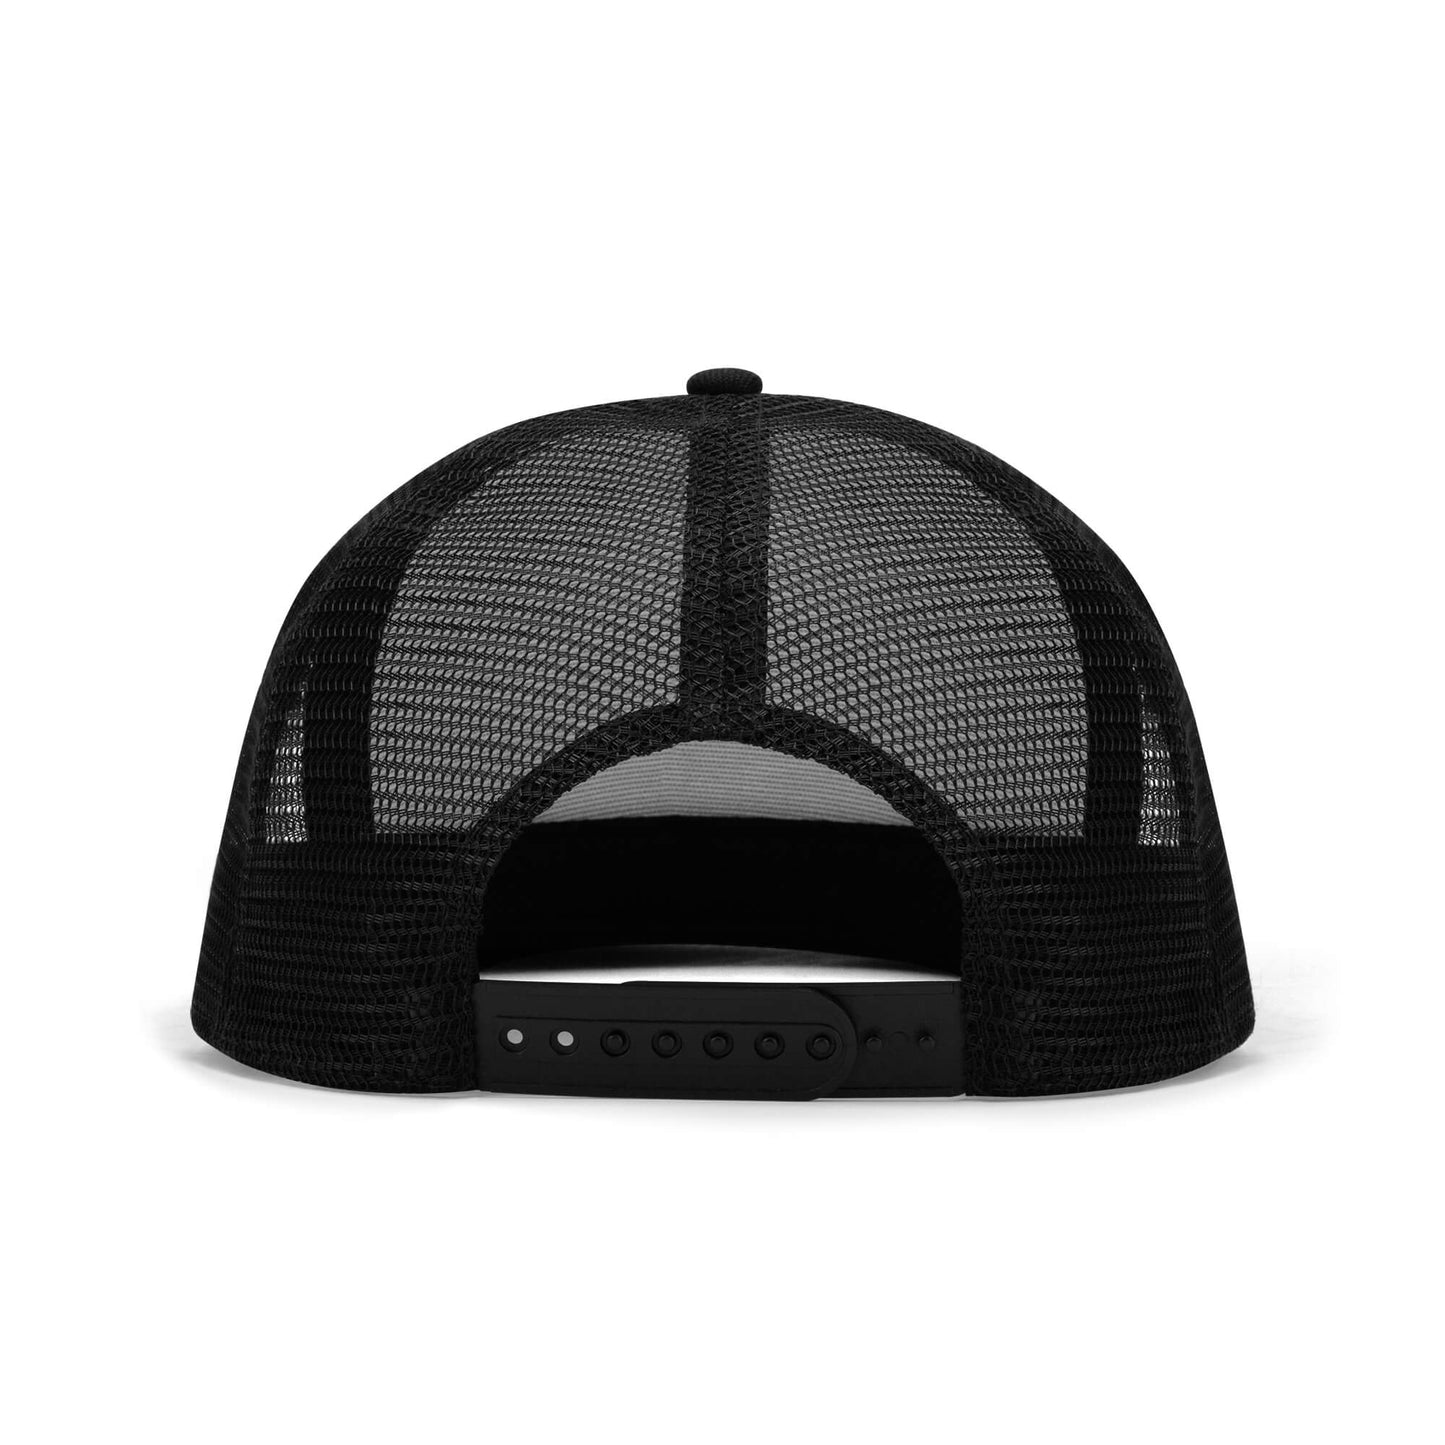 Philly Brotherly Love Adjustable Snapback Trucker Hat DOPiFiED Edition